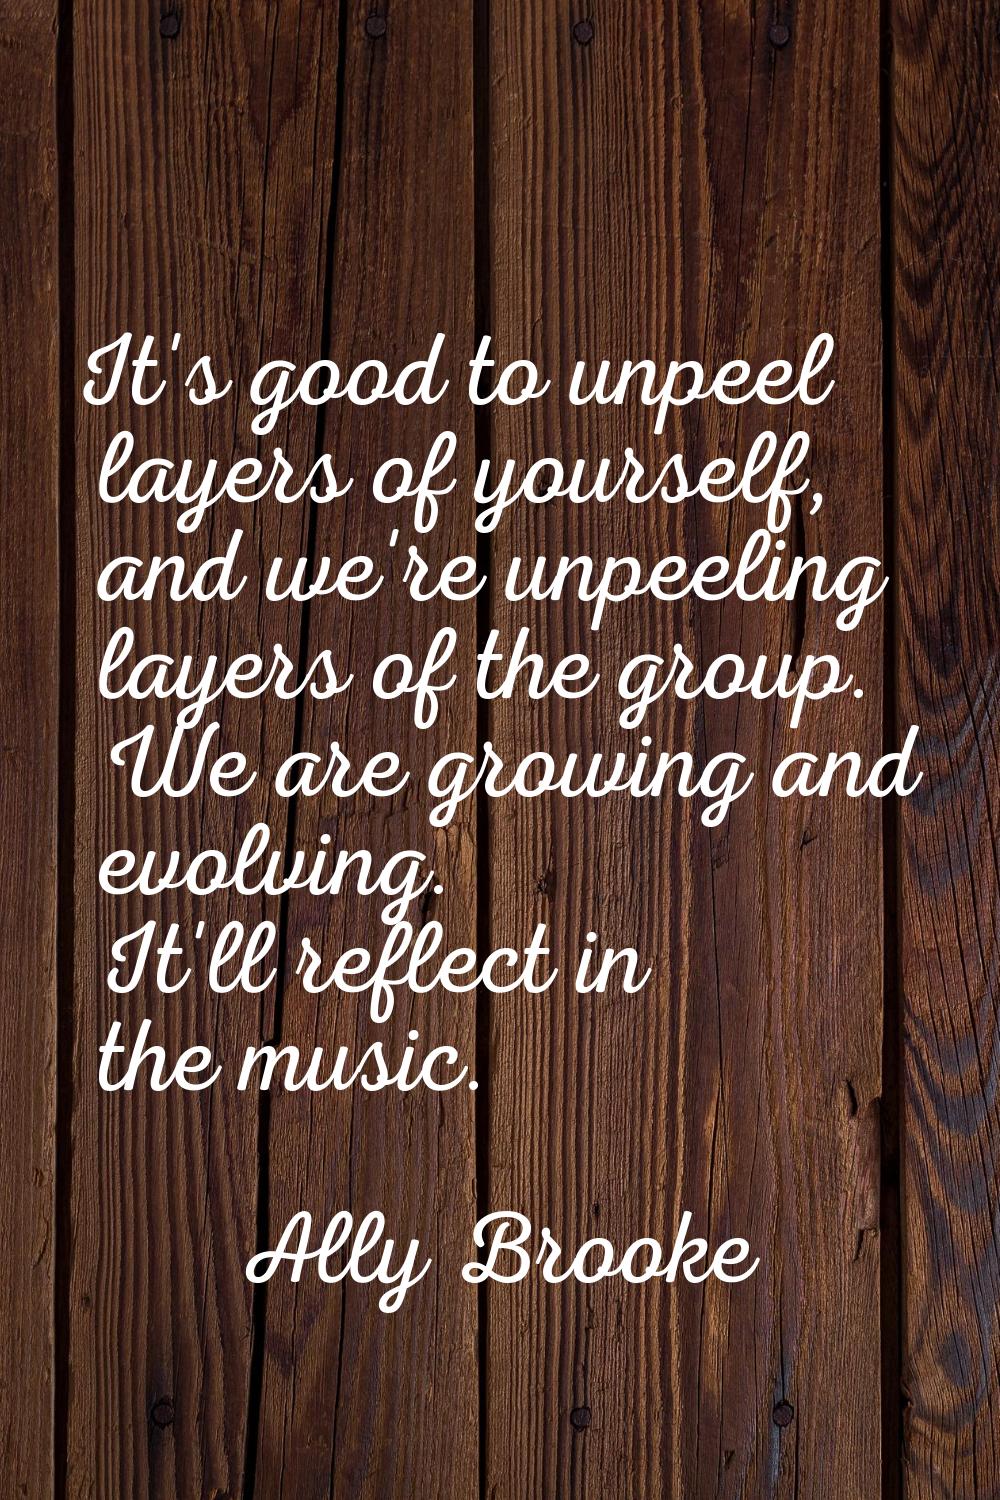 It's good to unpeel layers of yourself, and we're unpeeling layers of the group. We are growing and